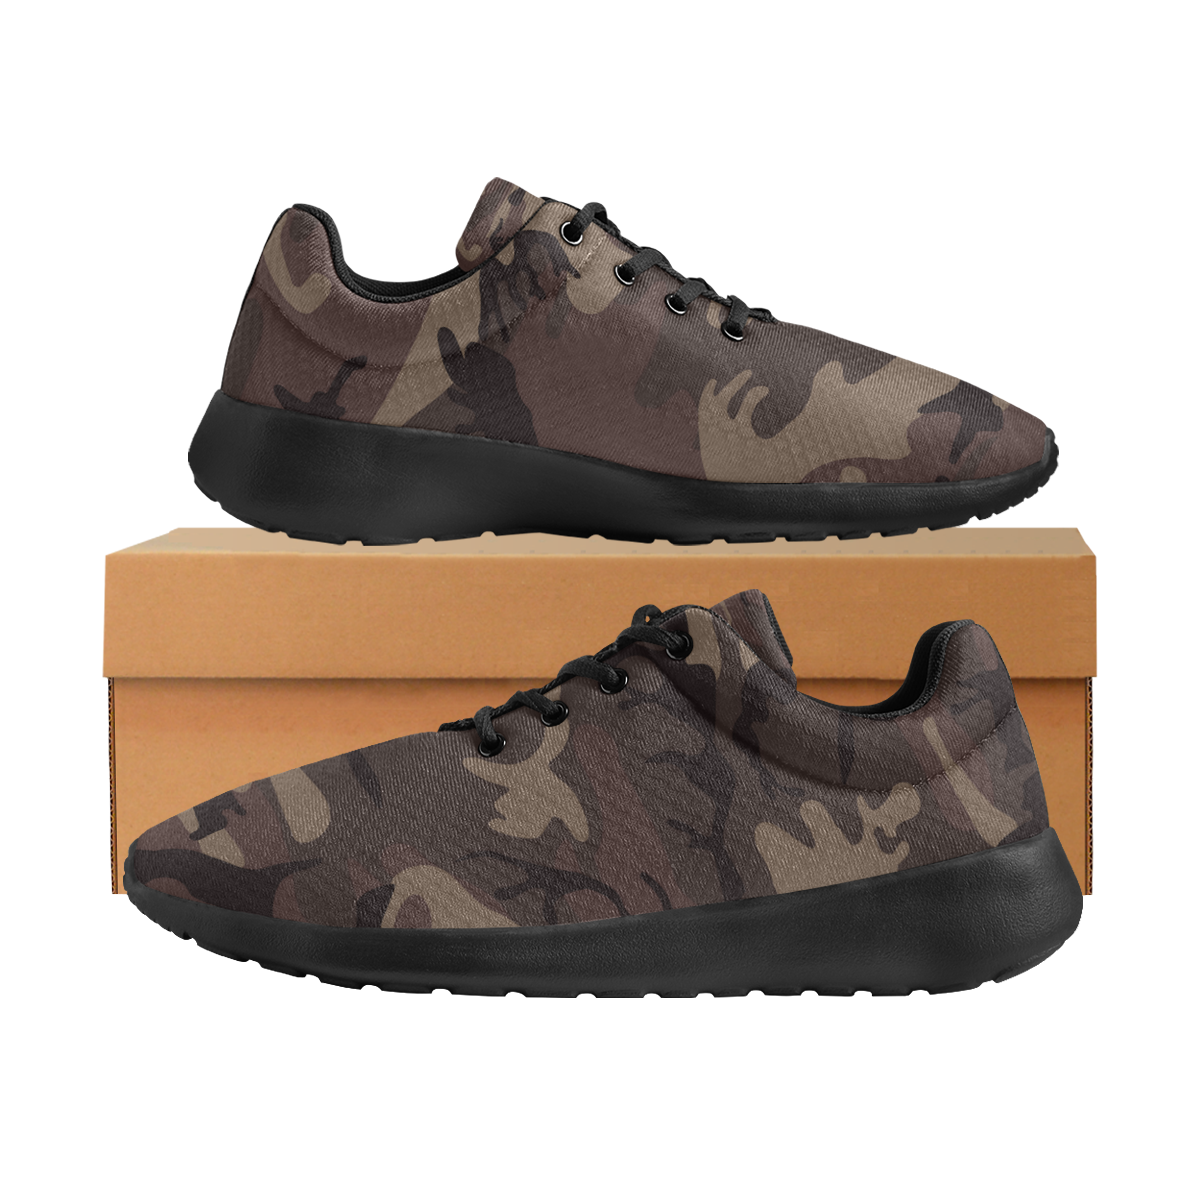 Camo Red Brown Women's Athletic Shoes (Model 0200)